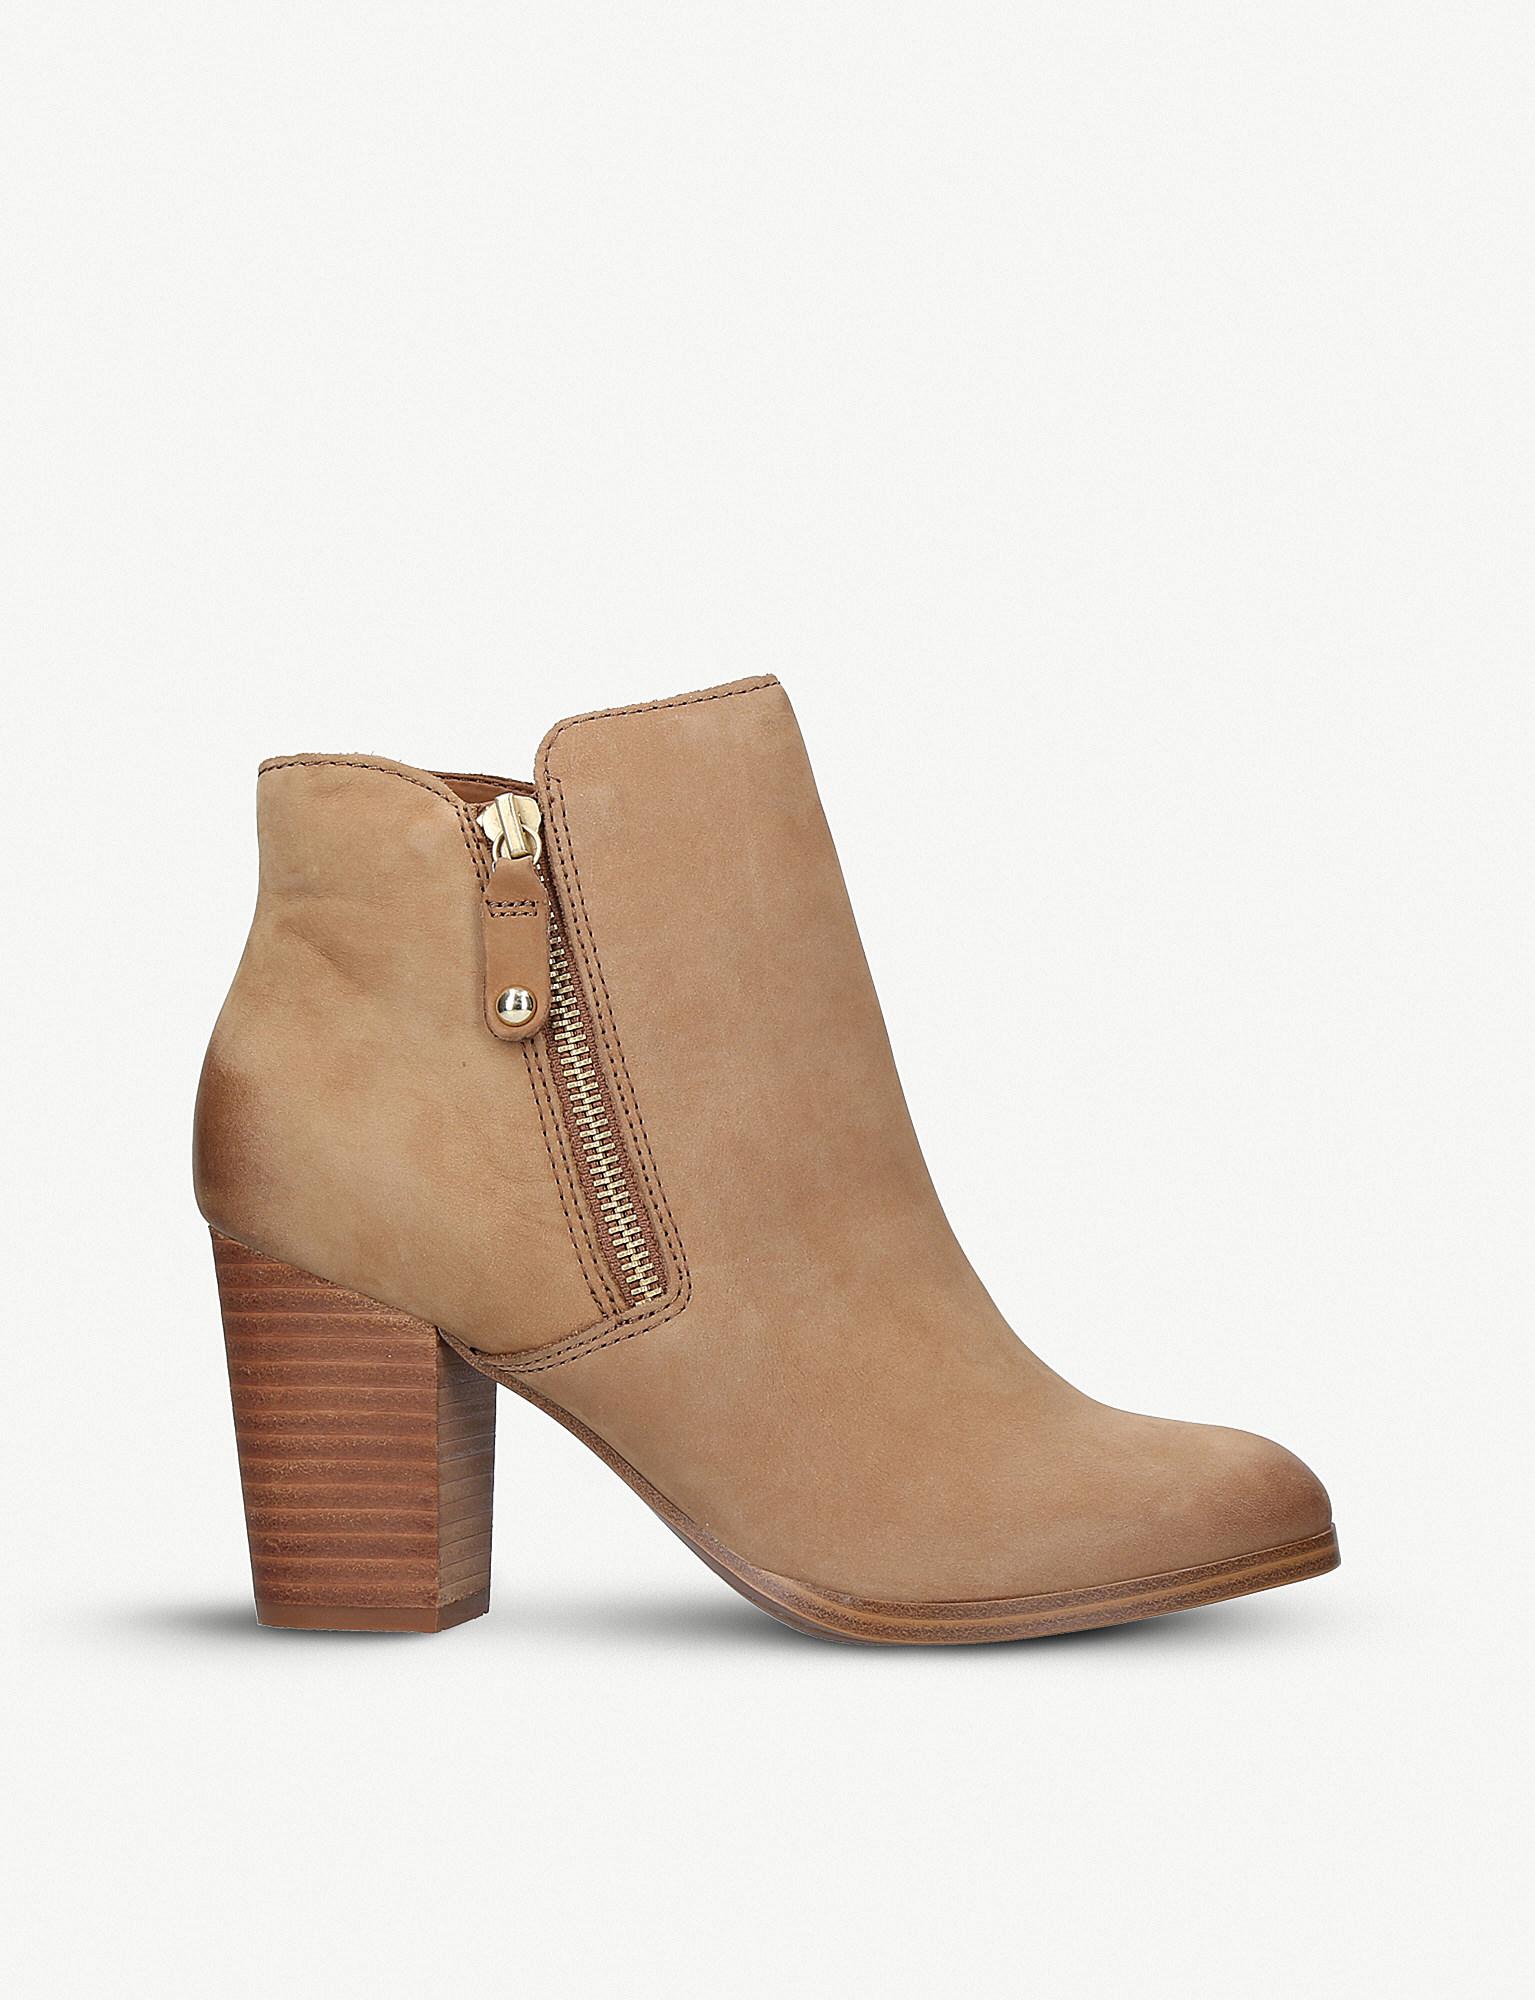 ALDO Naedia Leather Boots in Brown | Lyst